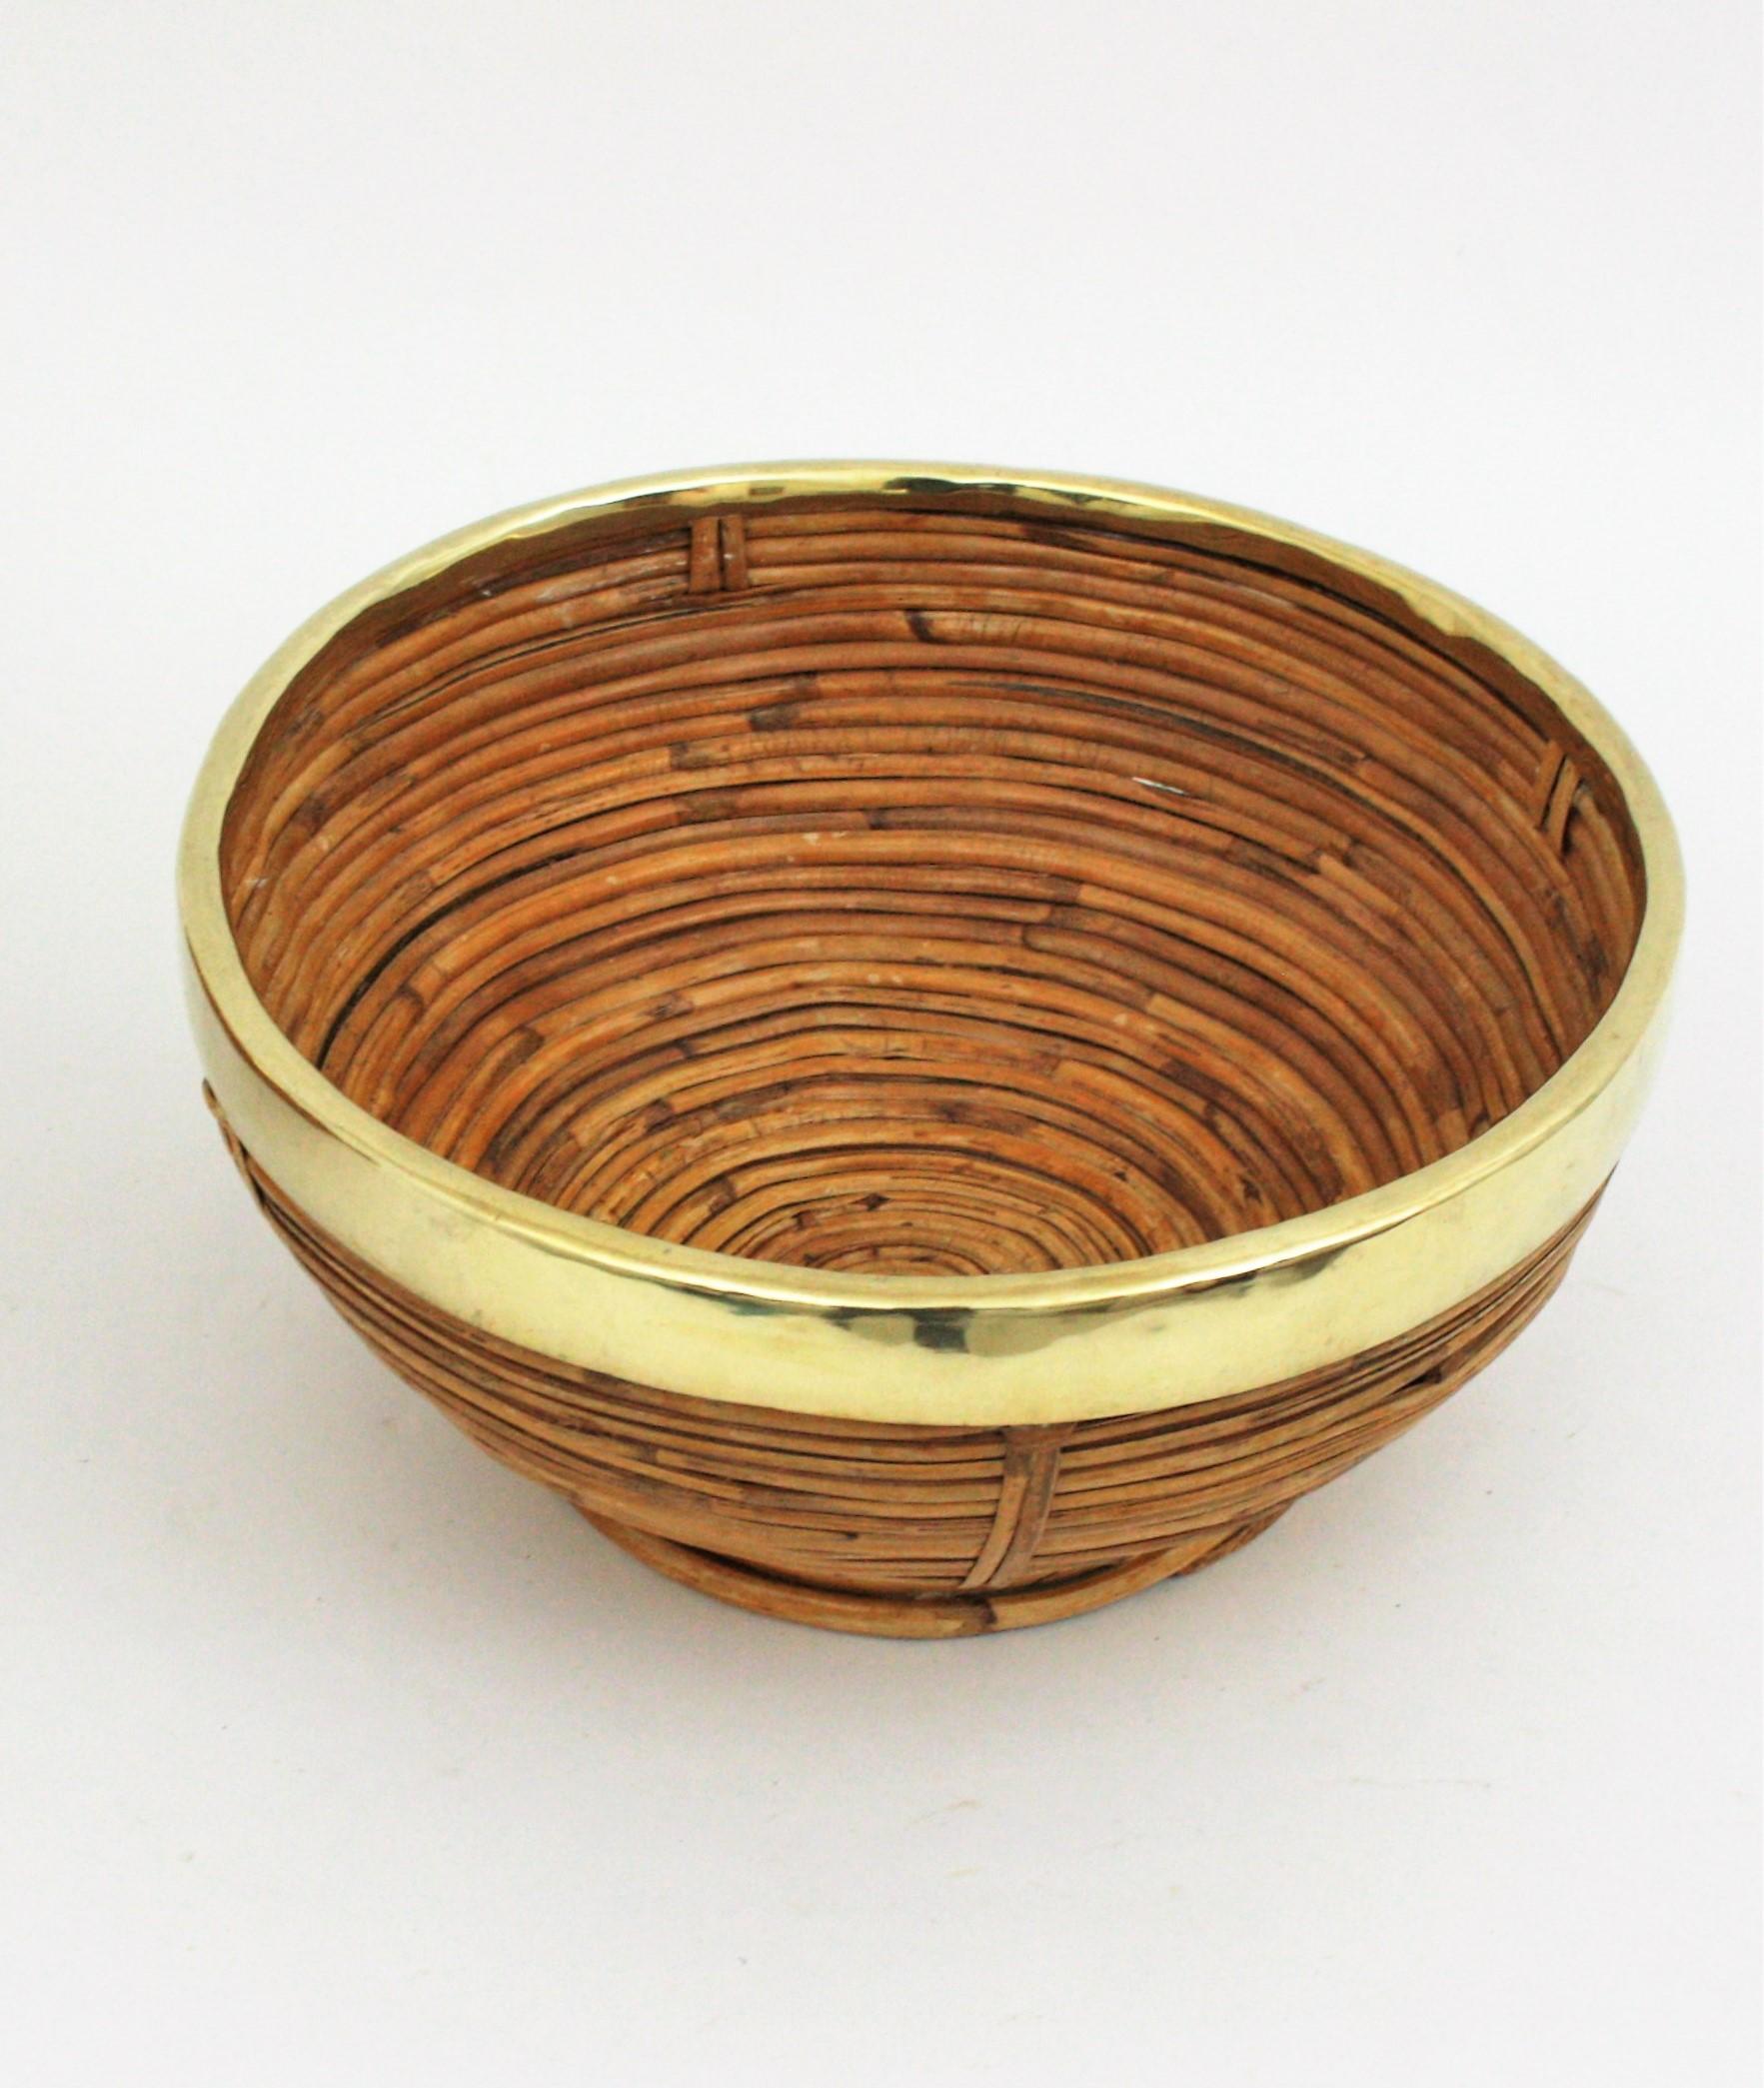 Rattan and Brass Basket Centerpiece Bowl, Italy, 1970s For Sale 5